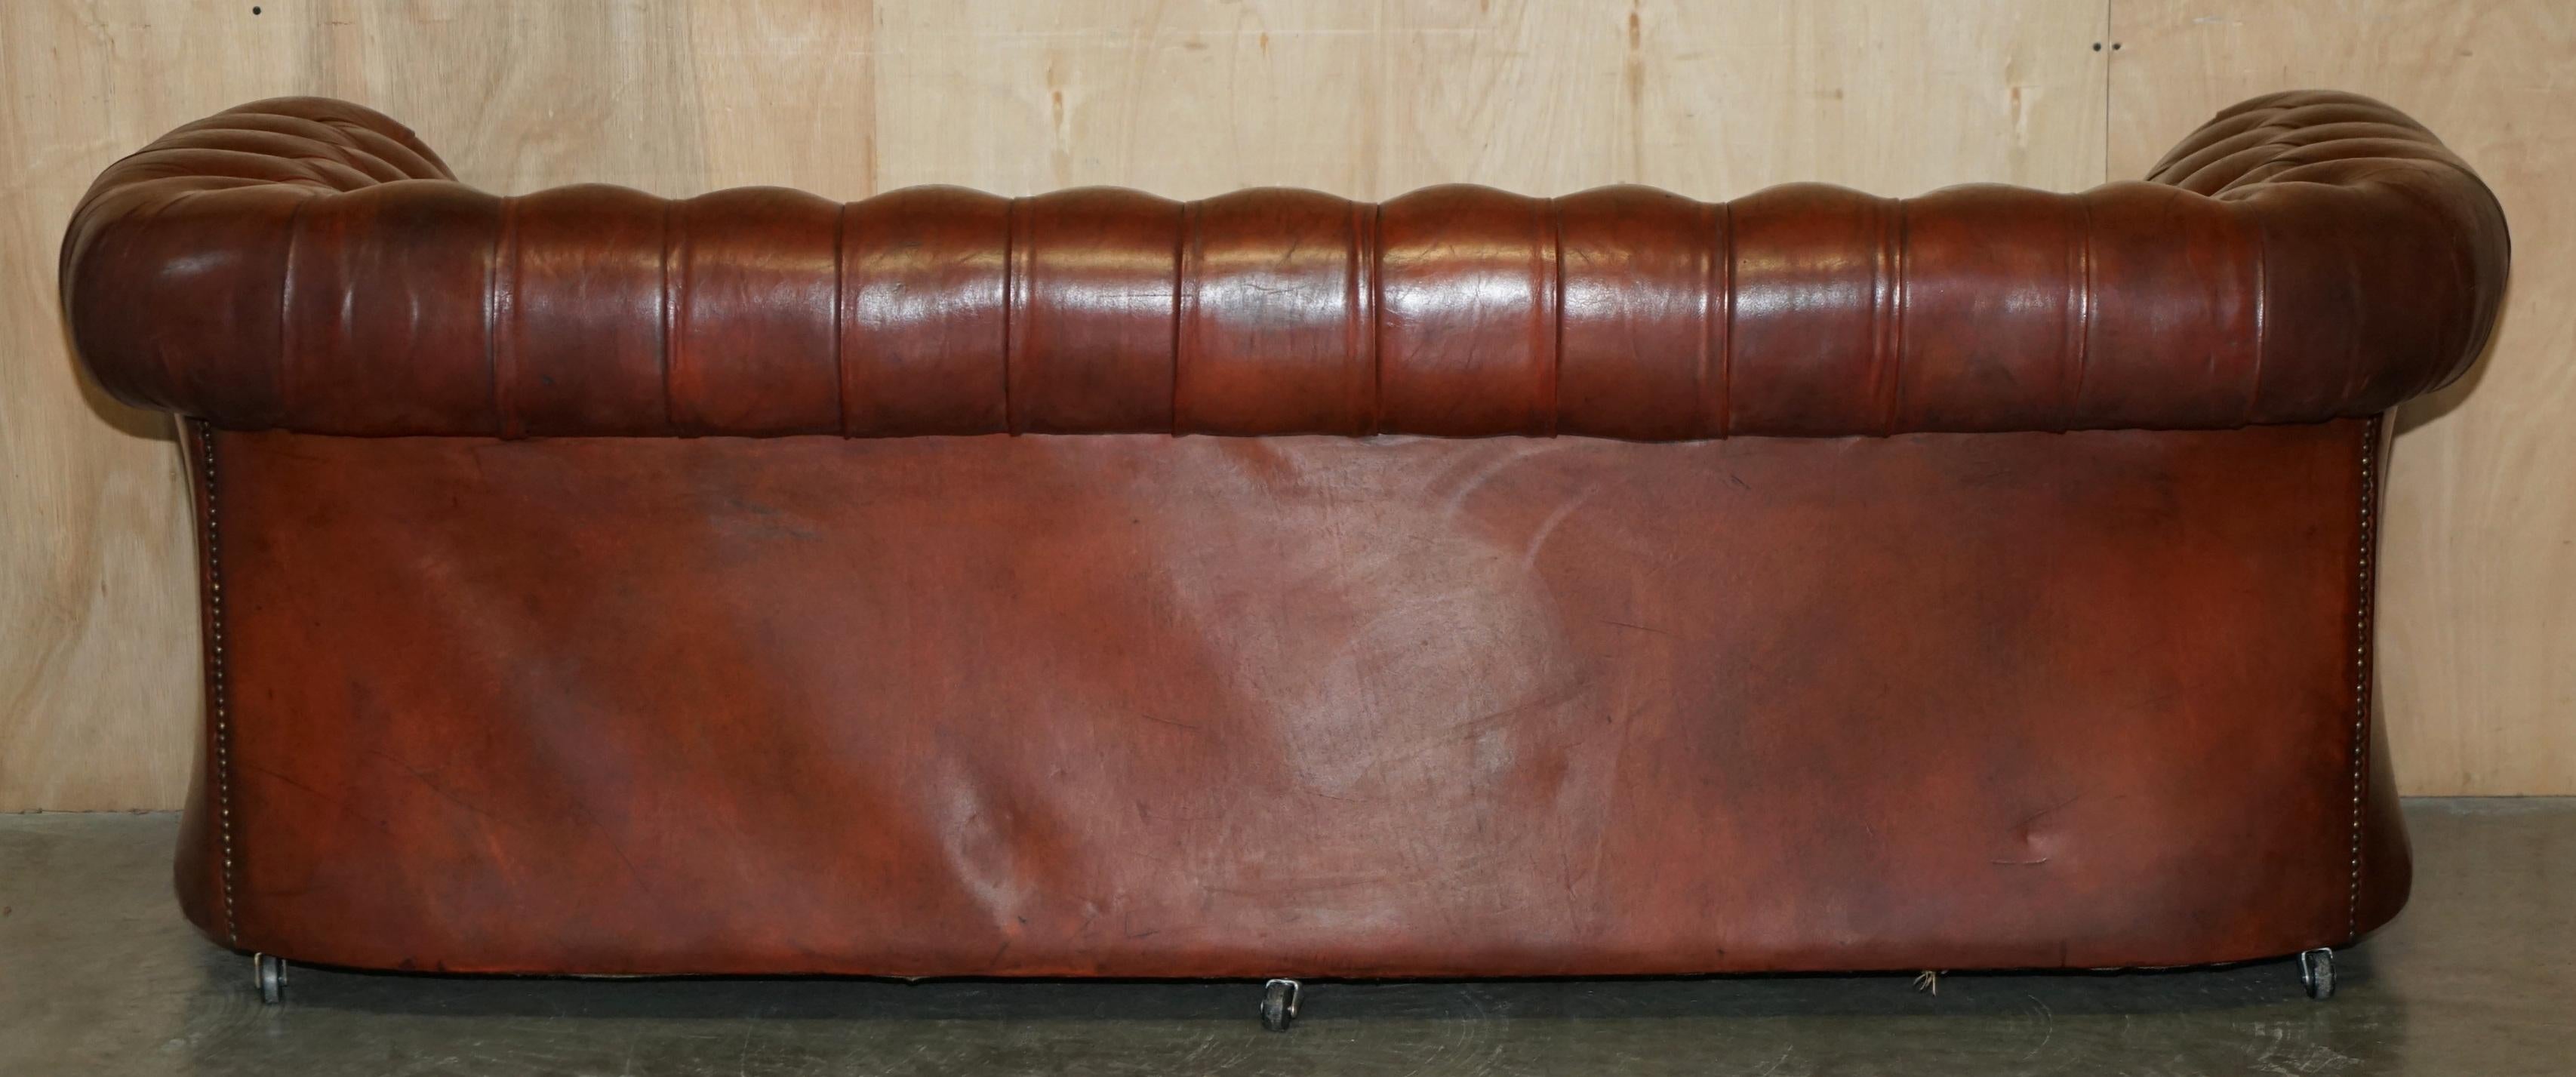 FULLY COIL SPRUNG VINTAGE 1920's HAND DYED BROWN LEATHER CHESTERFIELD CLUB SOFA For Sale 5